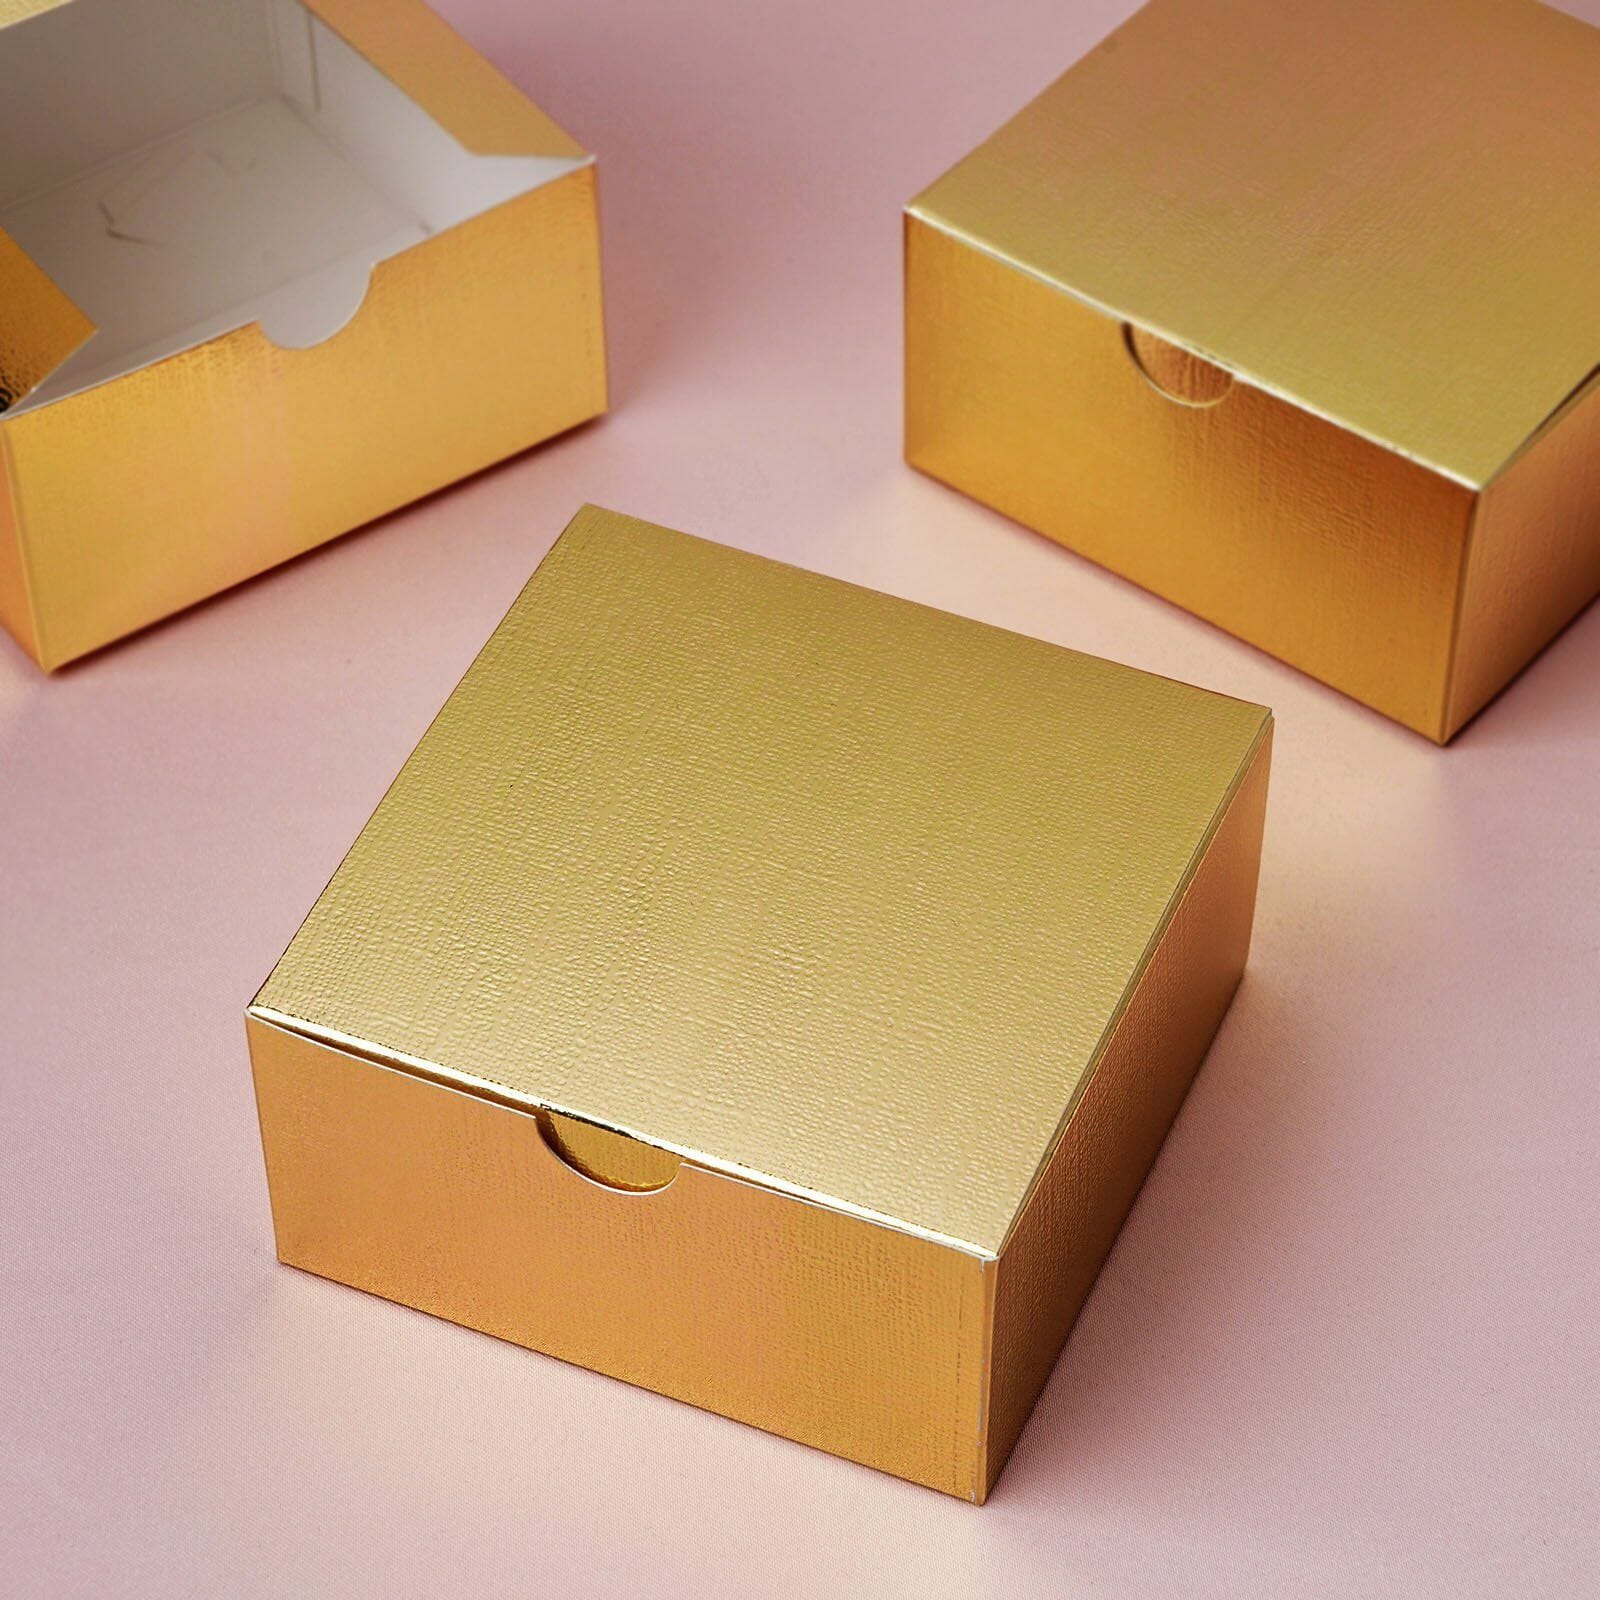 Source custom gold luxury perfume boxes sample cardboard empty packaging box  for perfume bottle packaging gift boxes set design making on m.